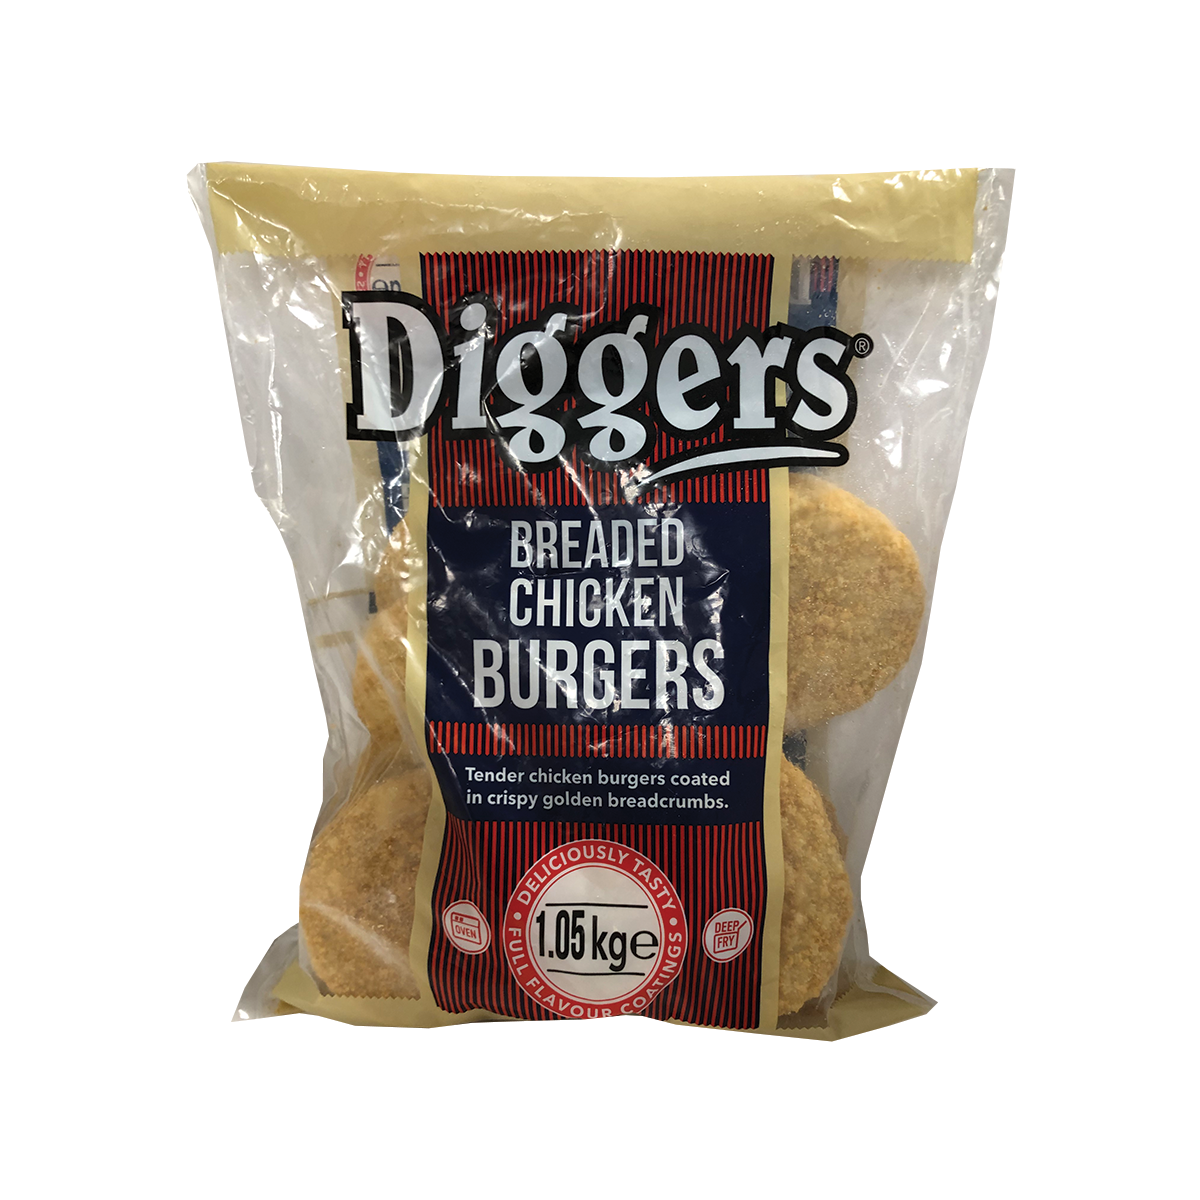 Diggers Breaded Chicken Burgers